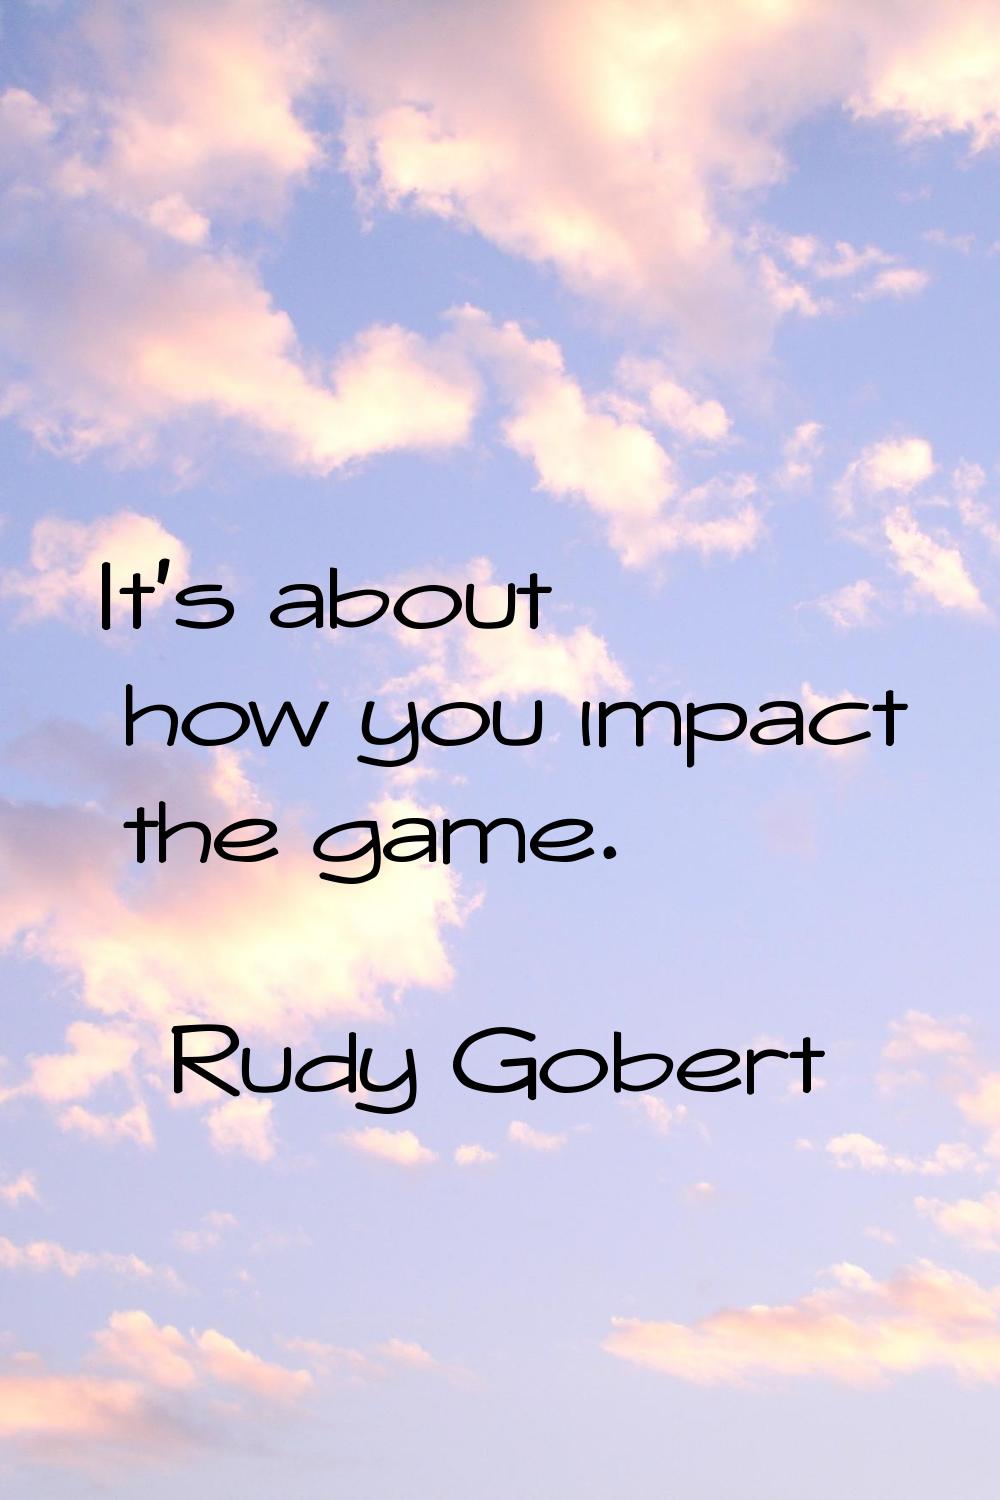 It's about how you impact the game.